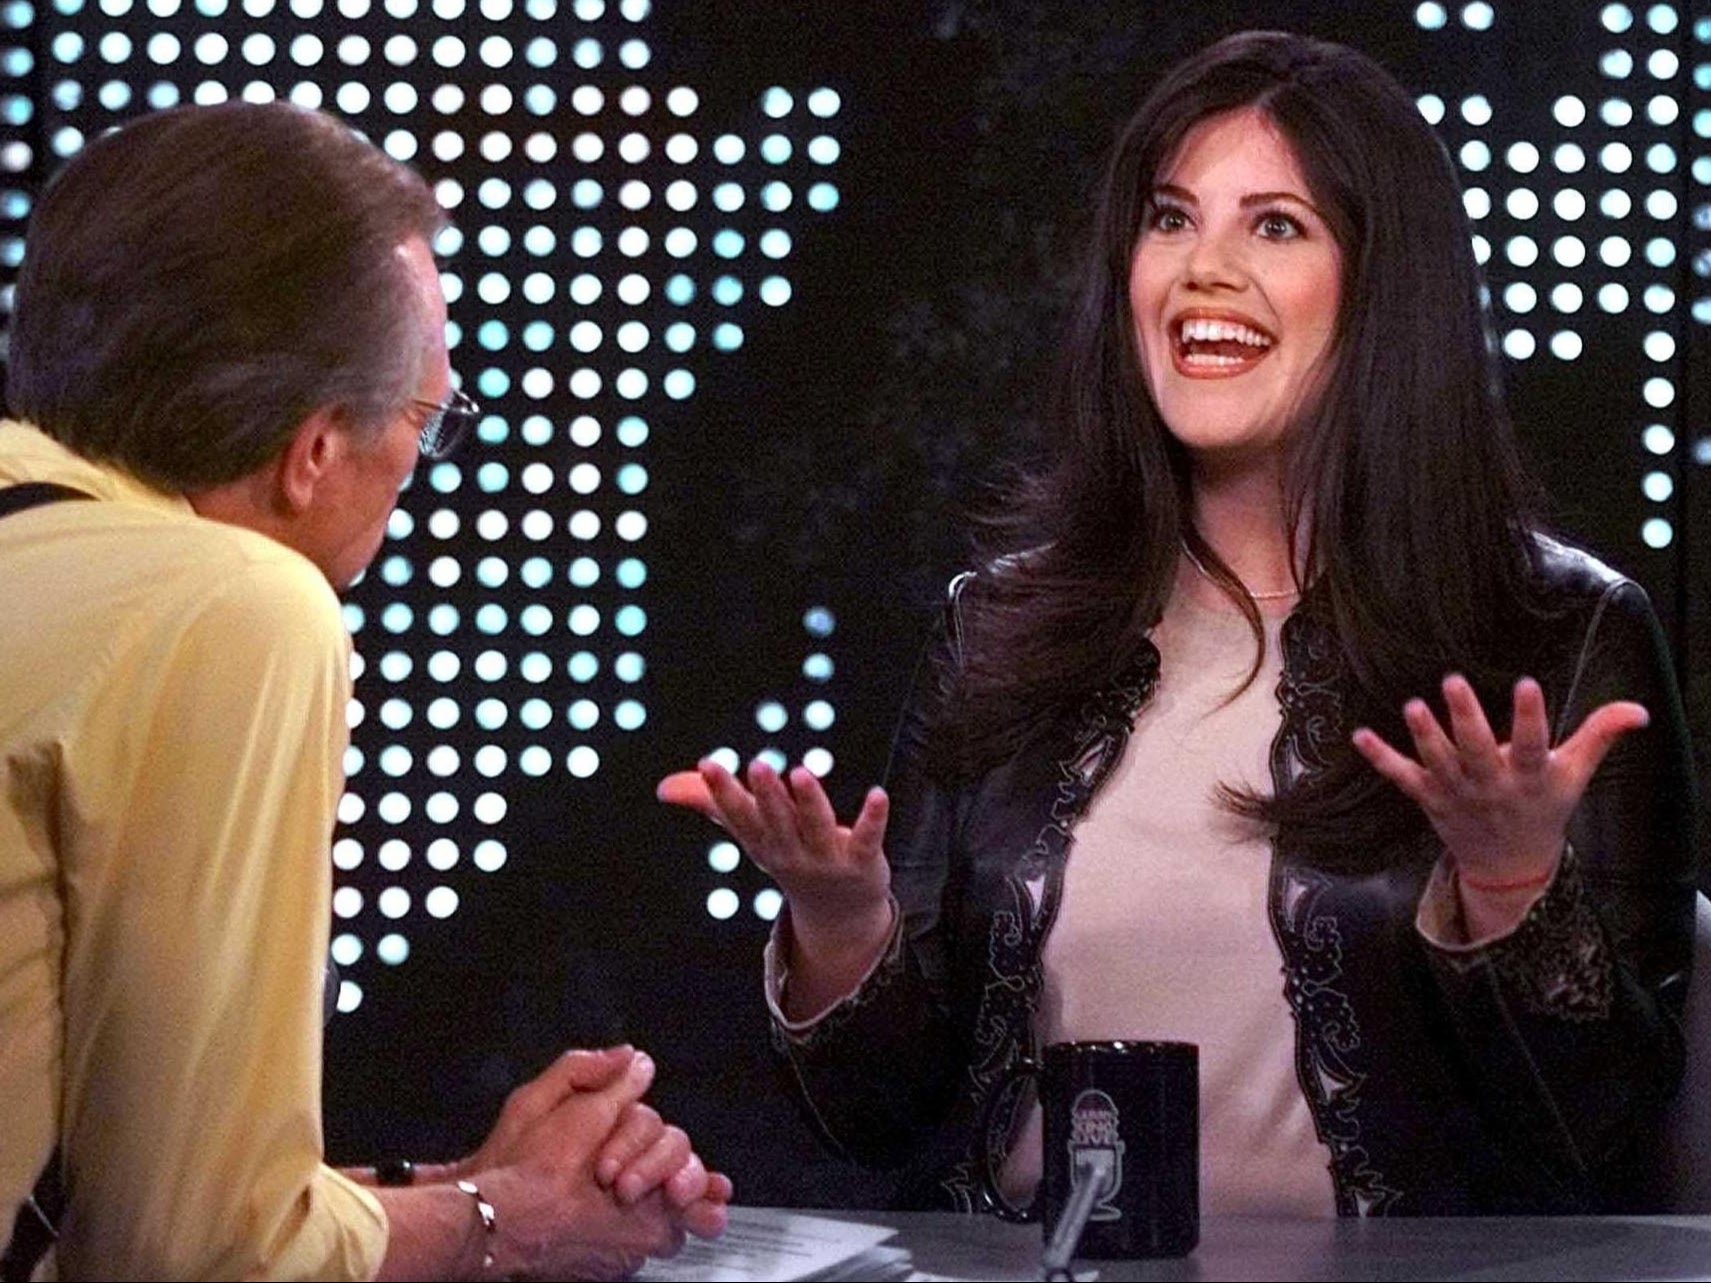 Not the main focus: King interviewing Monica Lewinsky in 2002